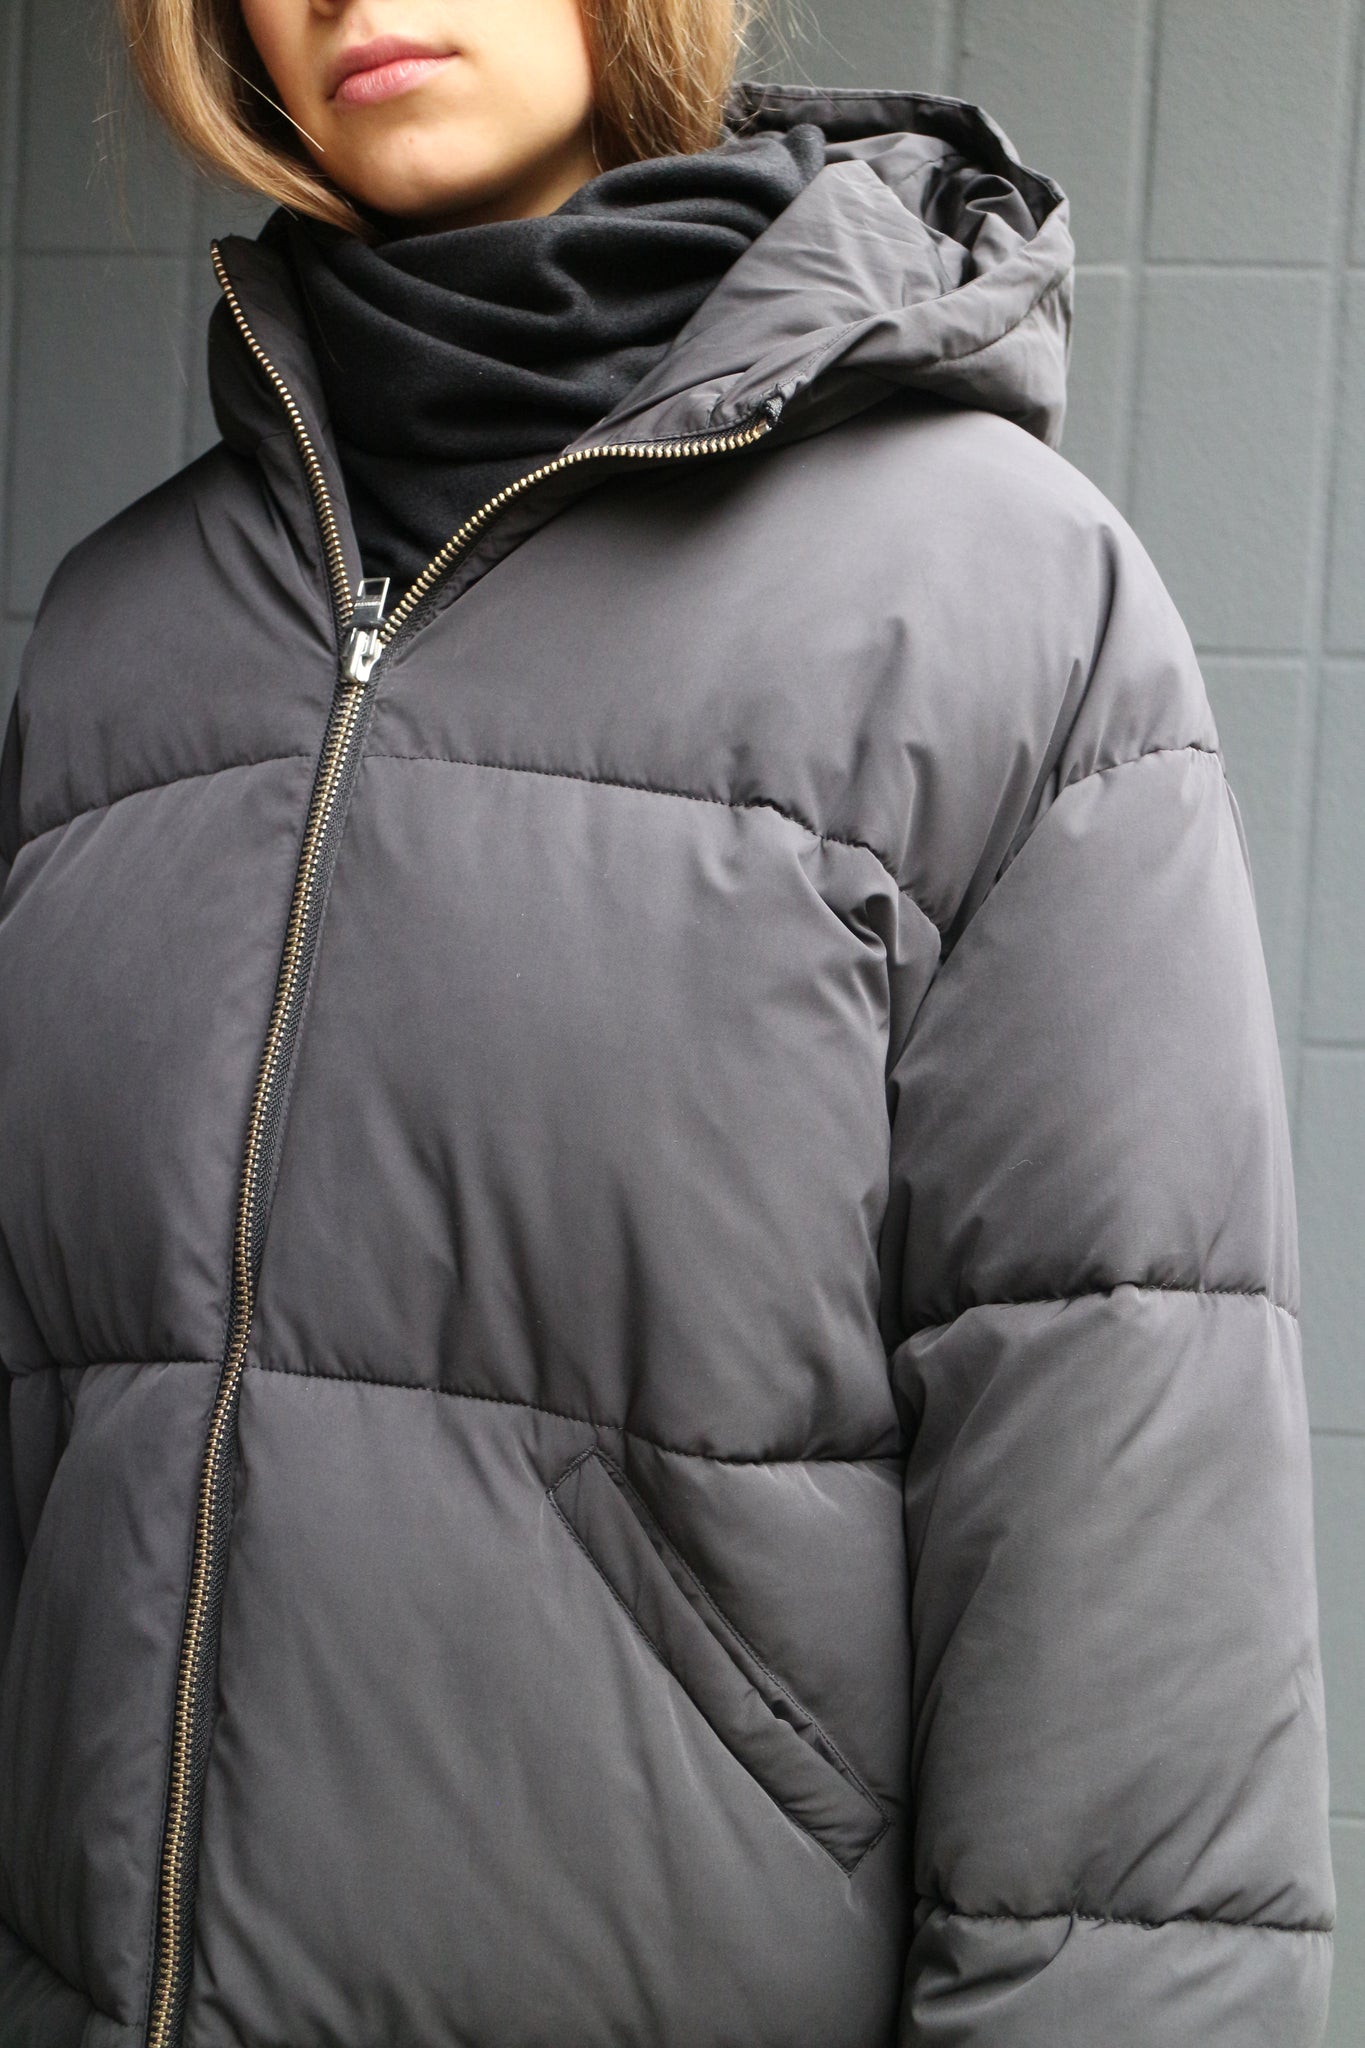 ELPHIN PUFFER JACKET BY EMBASSY OF BRICKS AND LOGS IN BLACK